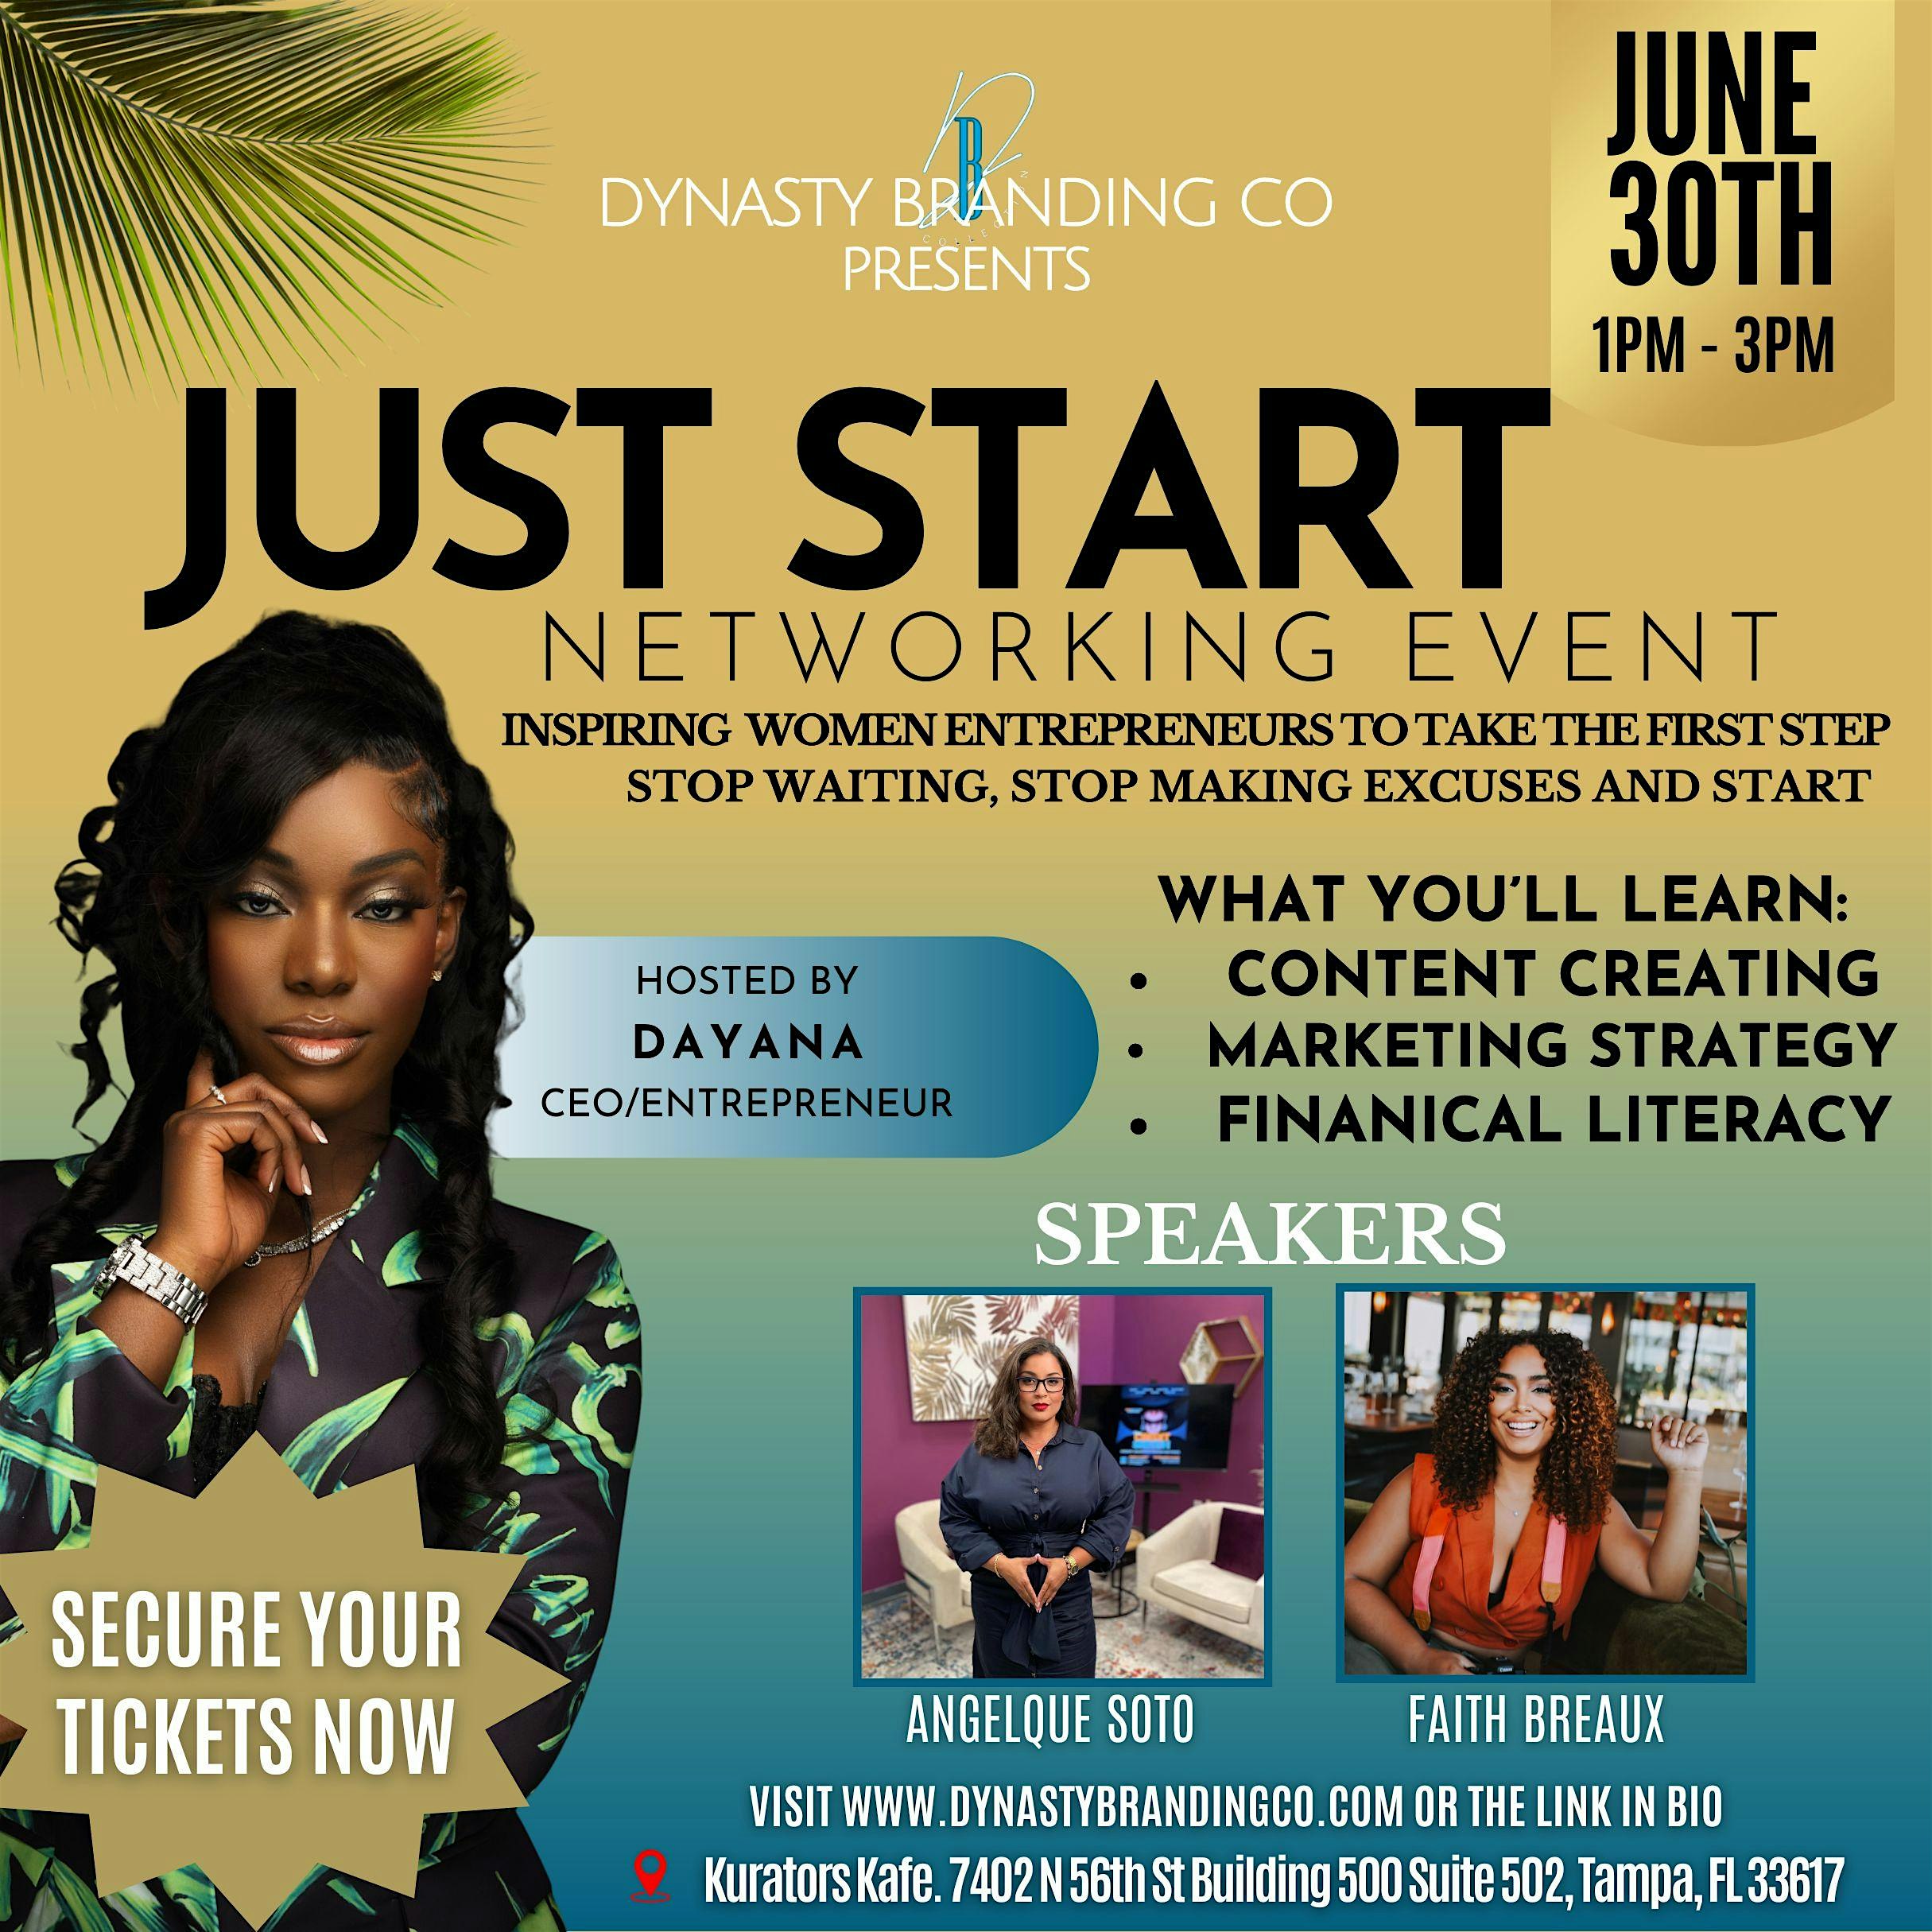 JUST START: NETWORKING EVENT